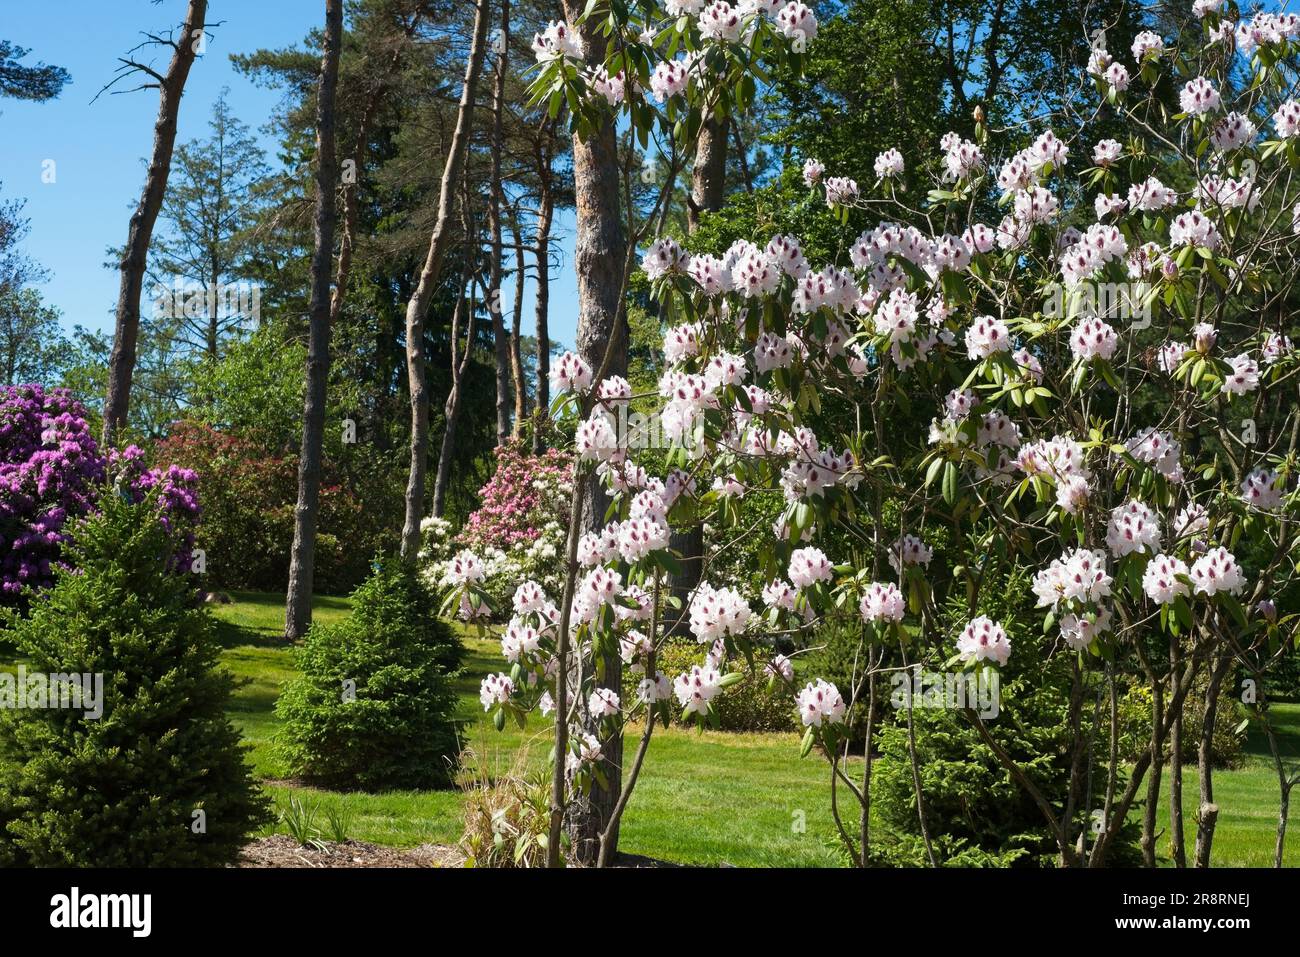 White rhododendrons dominate the foreground in an Ohio park, with pink ones in the background. Stock Photo